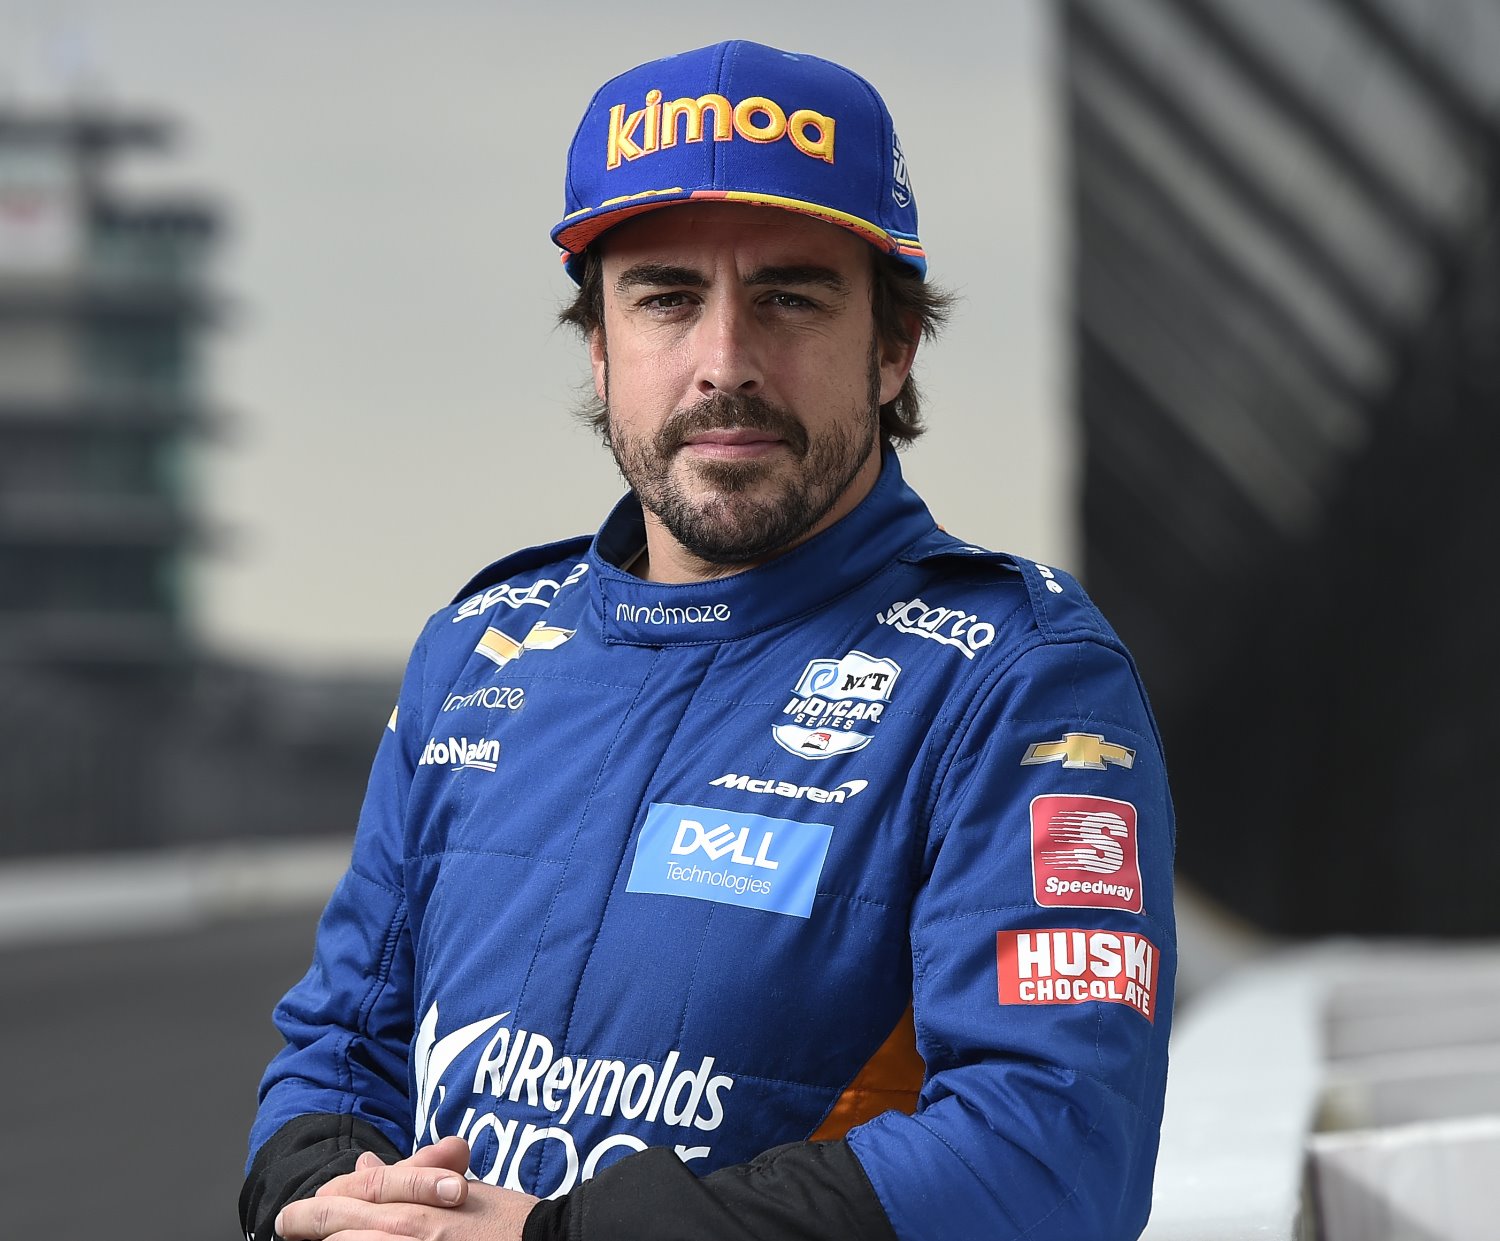 Alonso likely to return to 2020 Indy 500 with Andretti Autosport and no McLaren